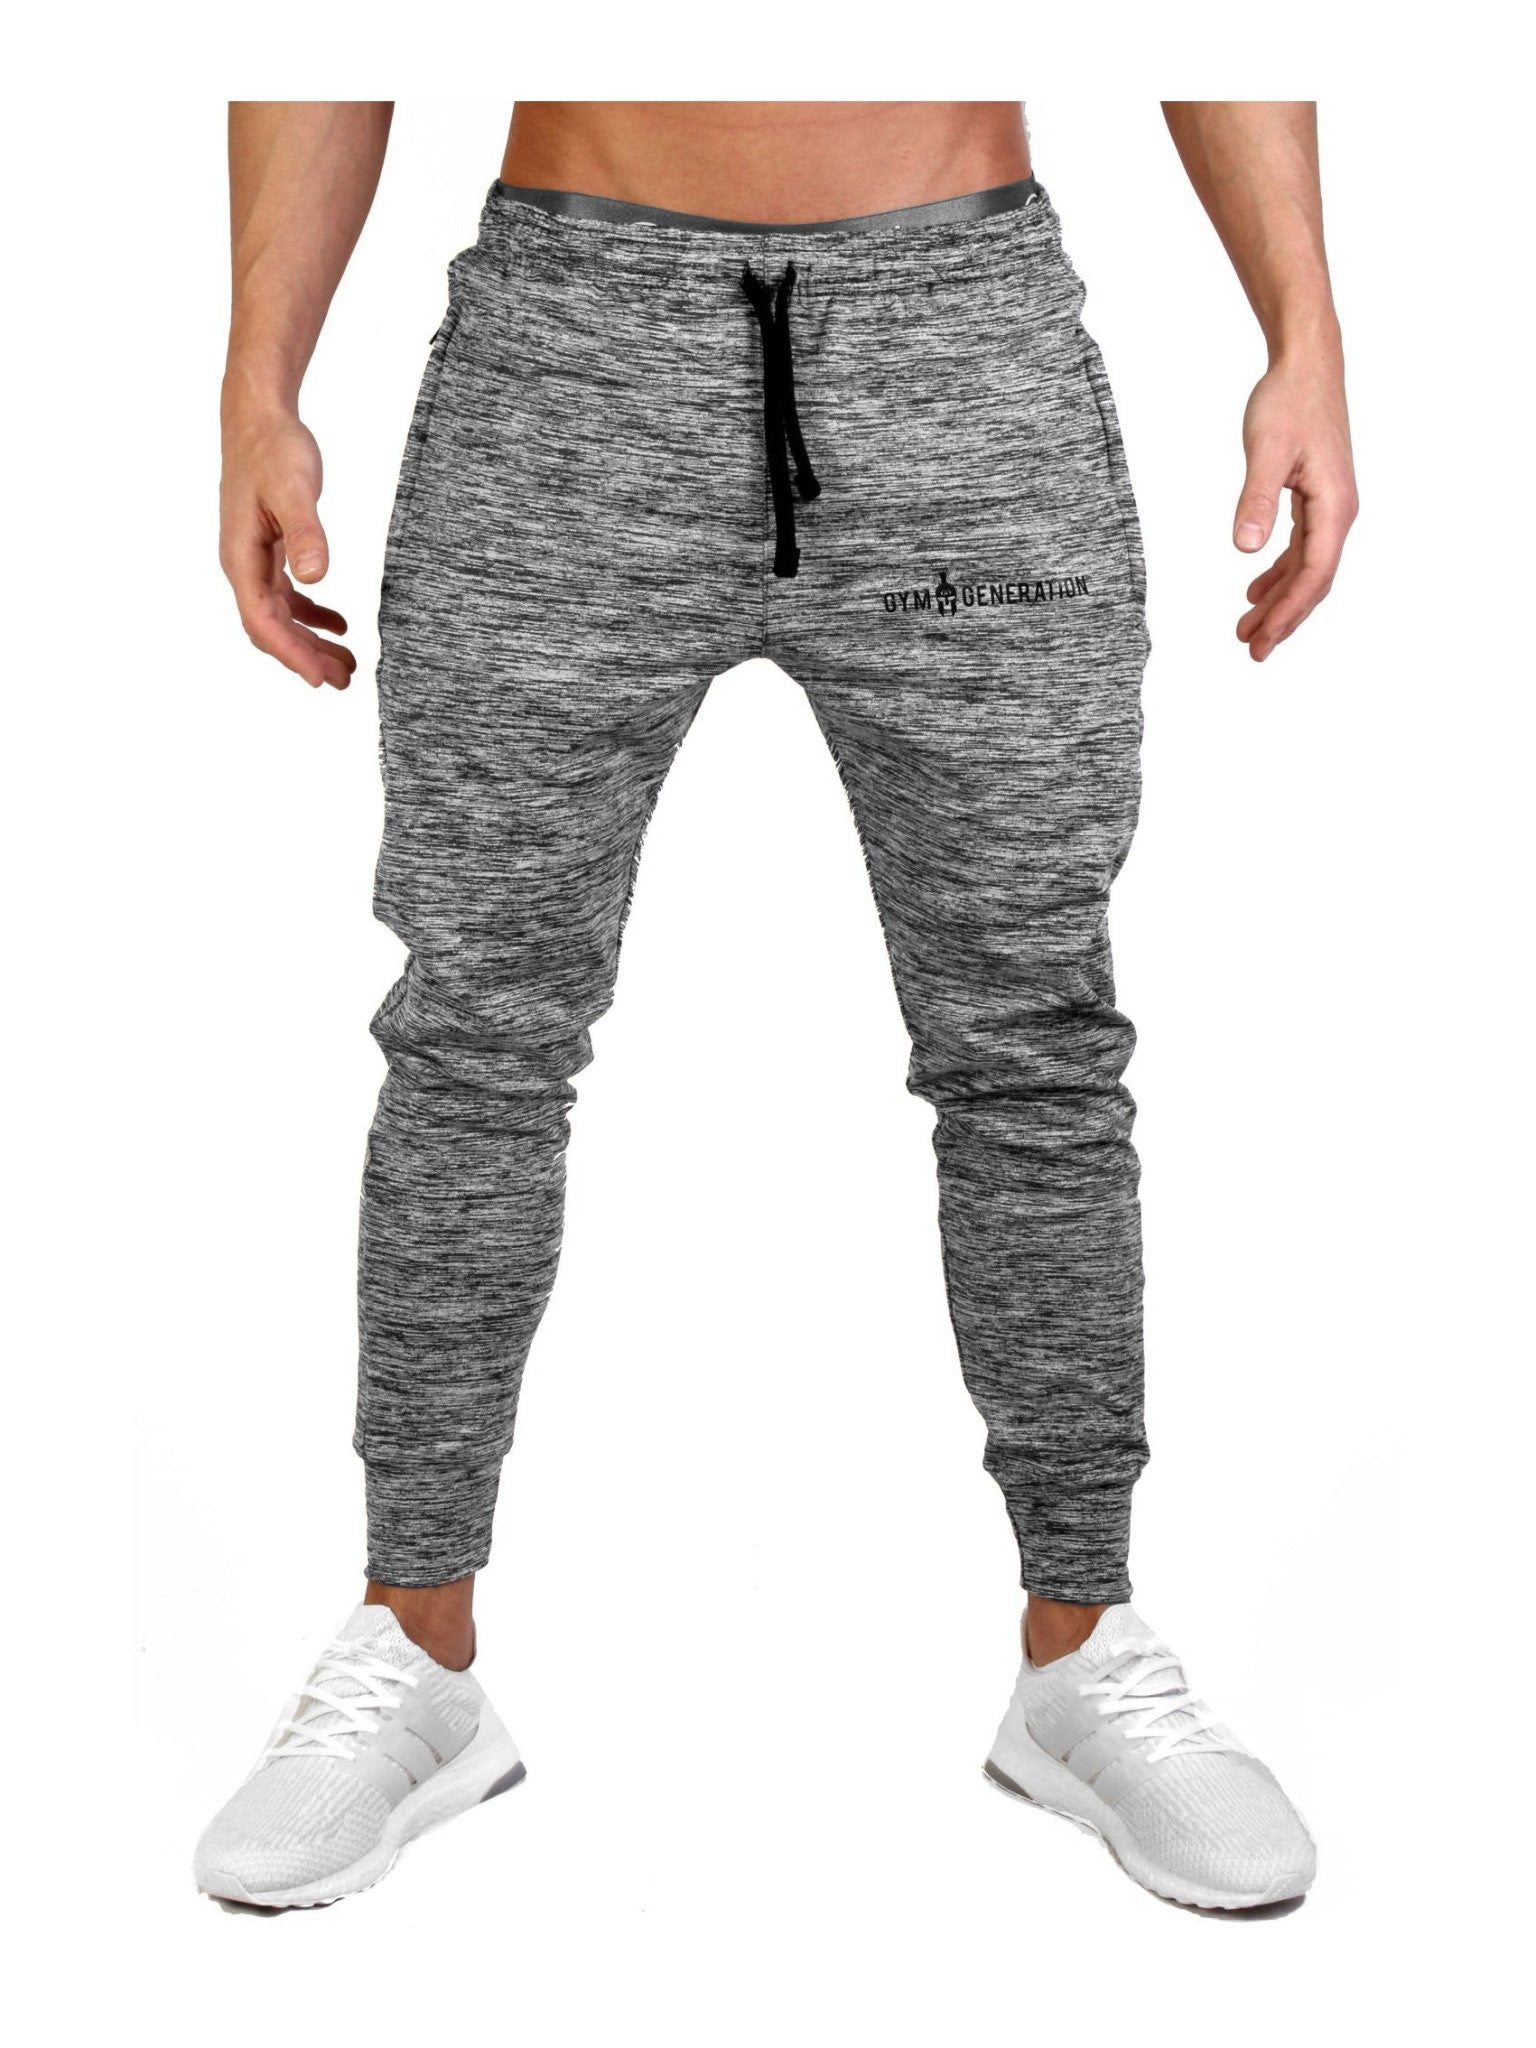 Men's Grey Sports Pants for Comfortable and Stylish Workouts - Shop Now ...